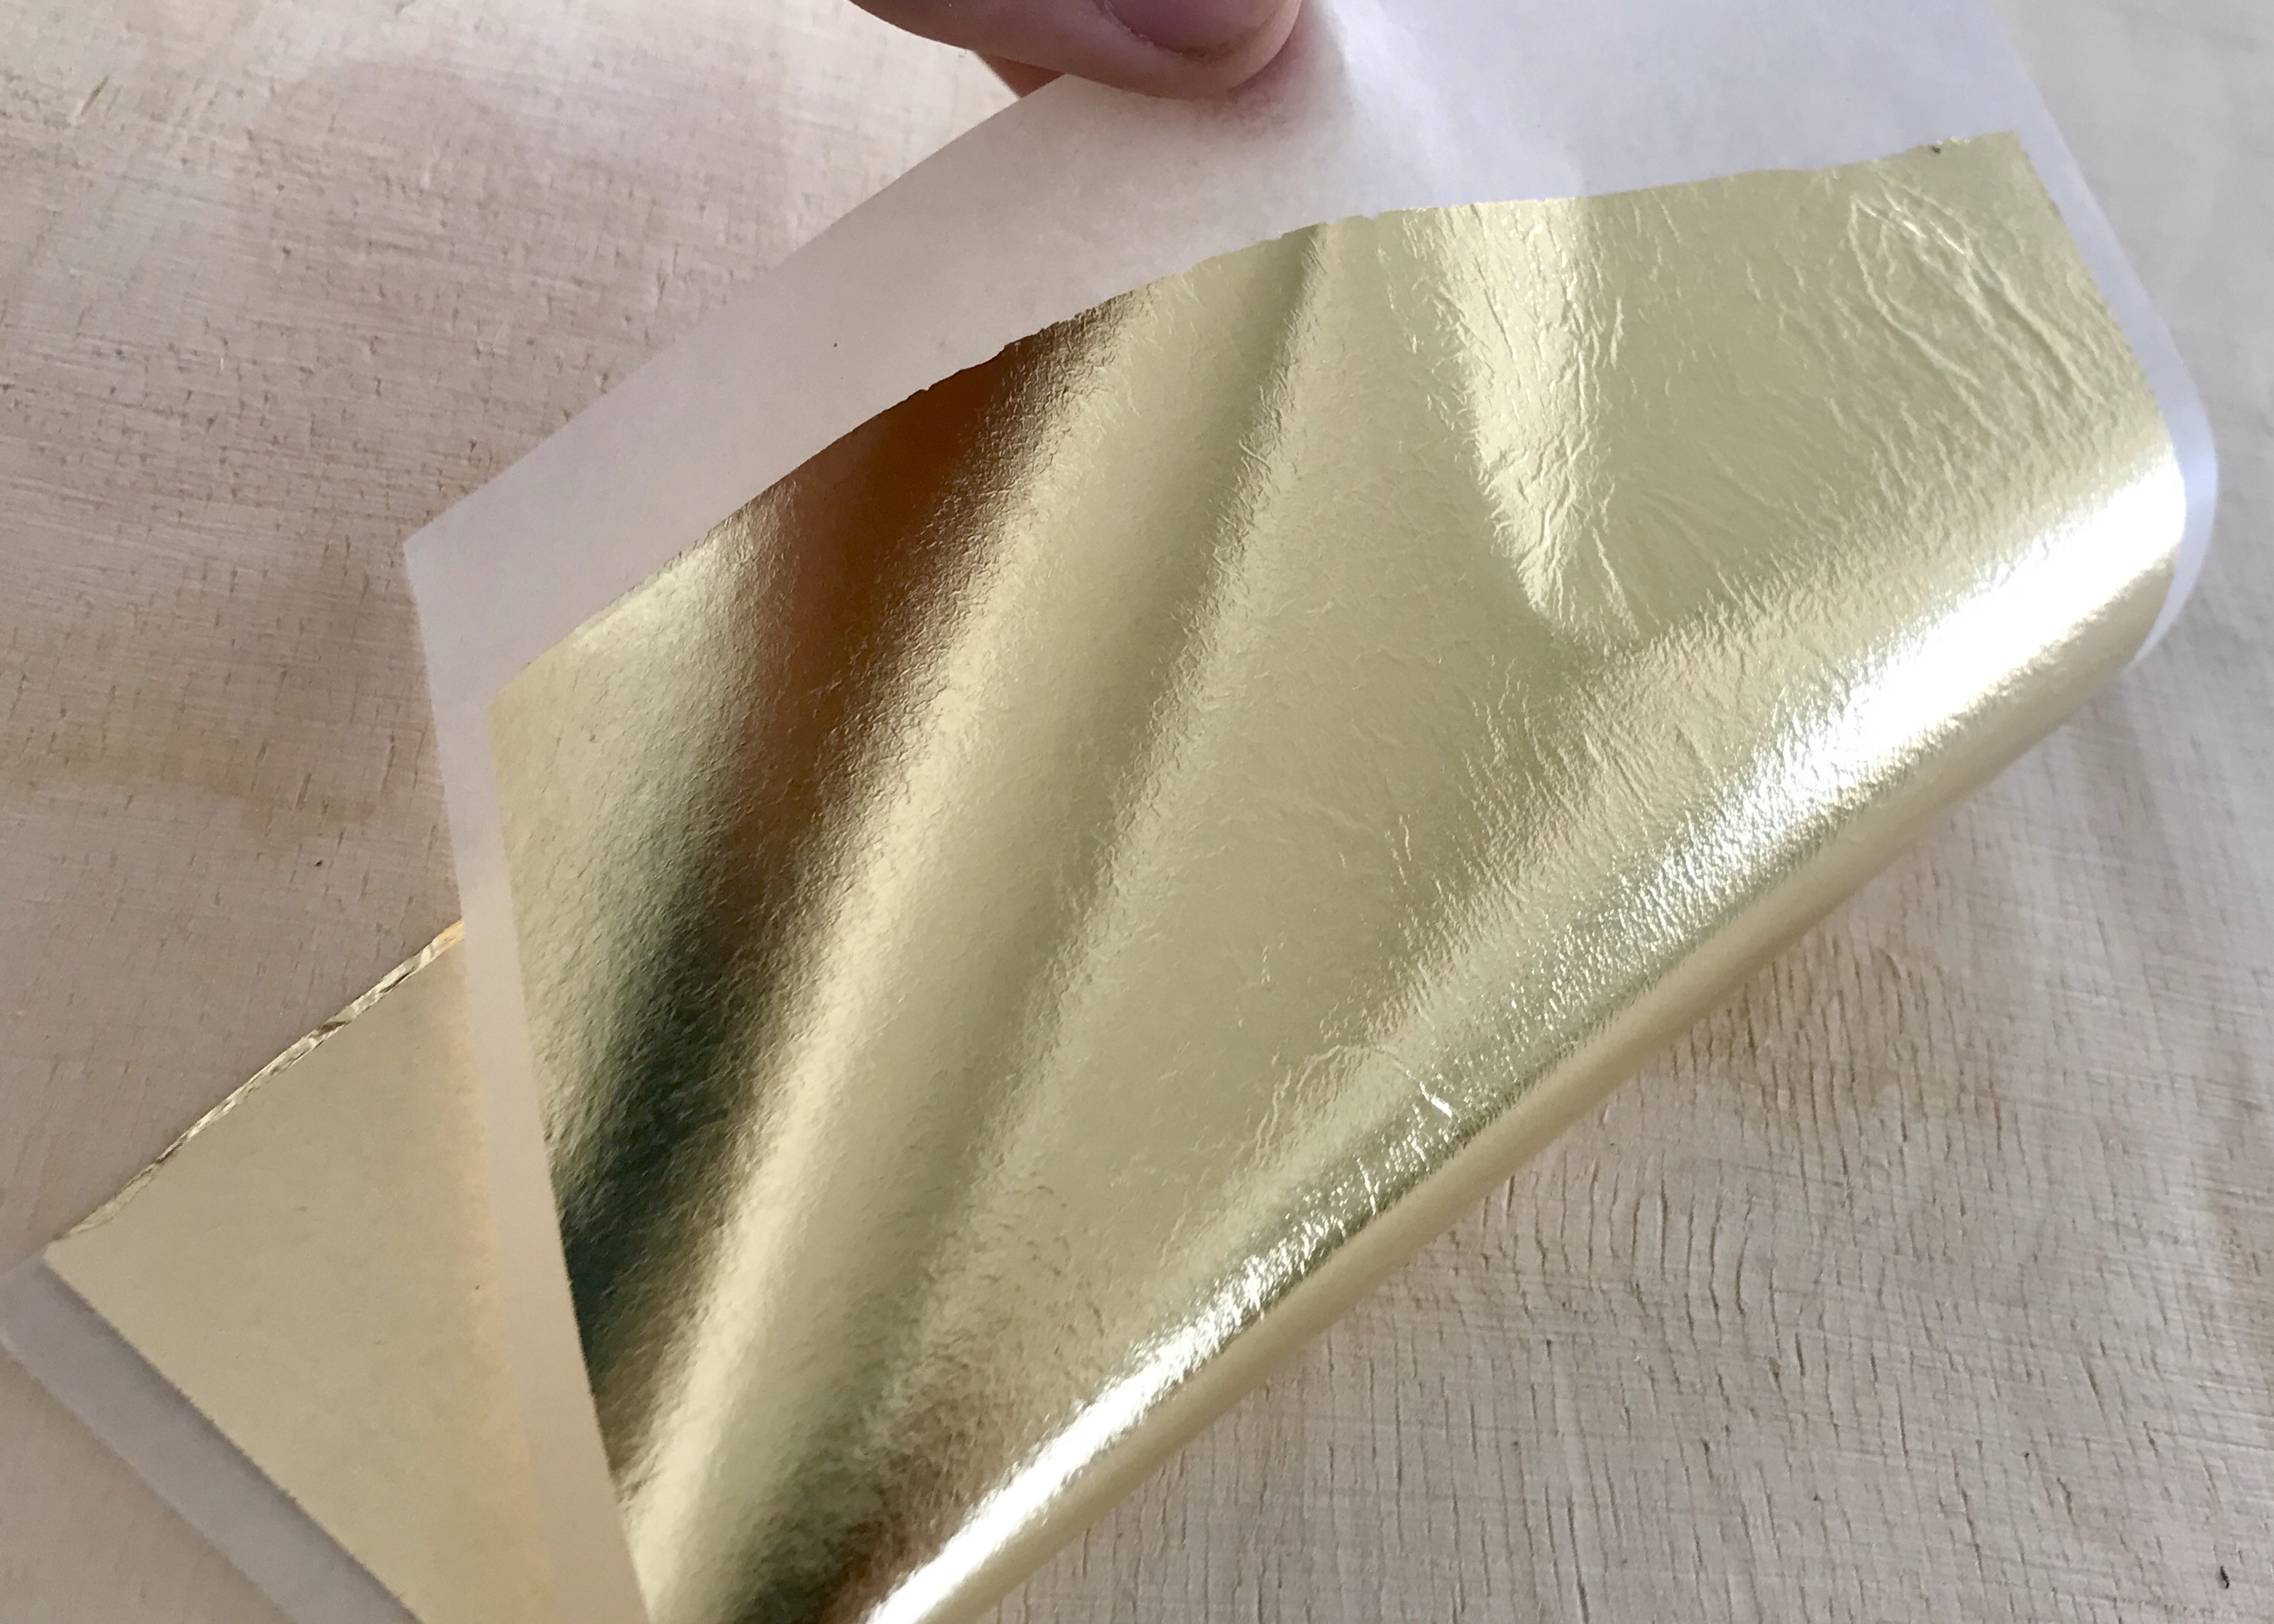 Gold leaf production - How is it made?